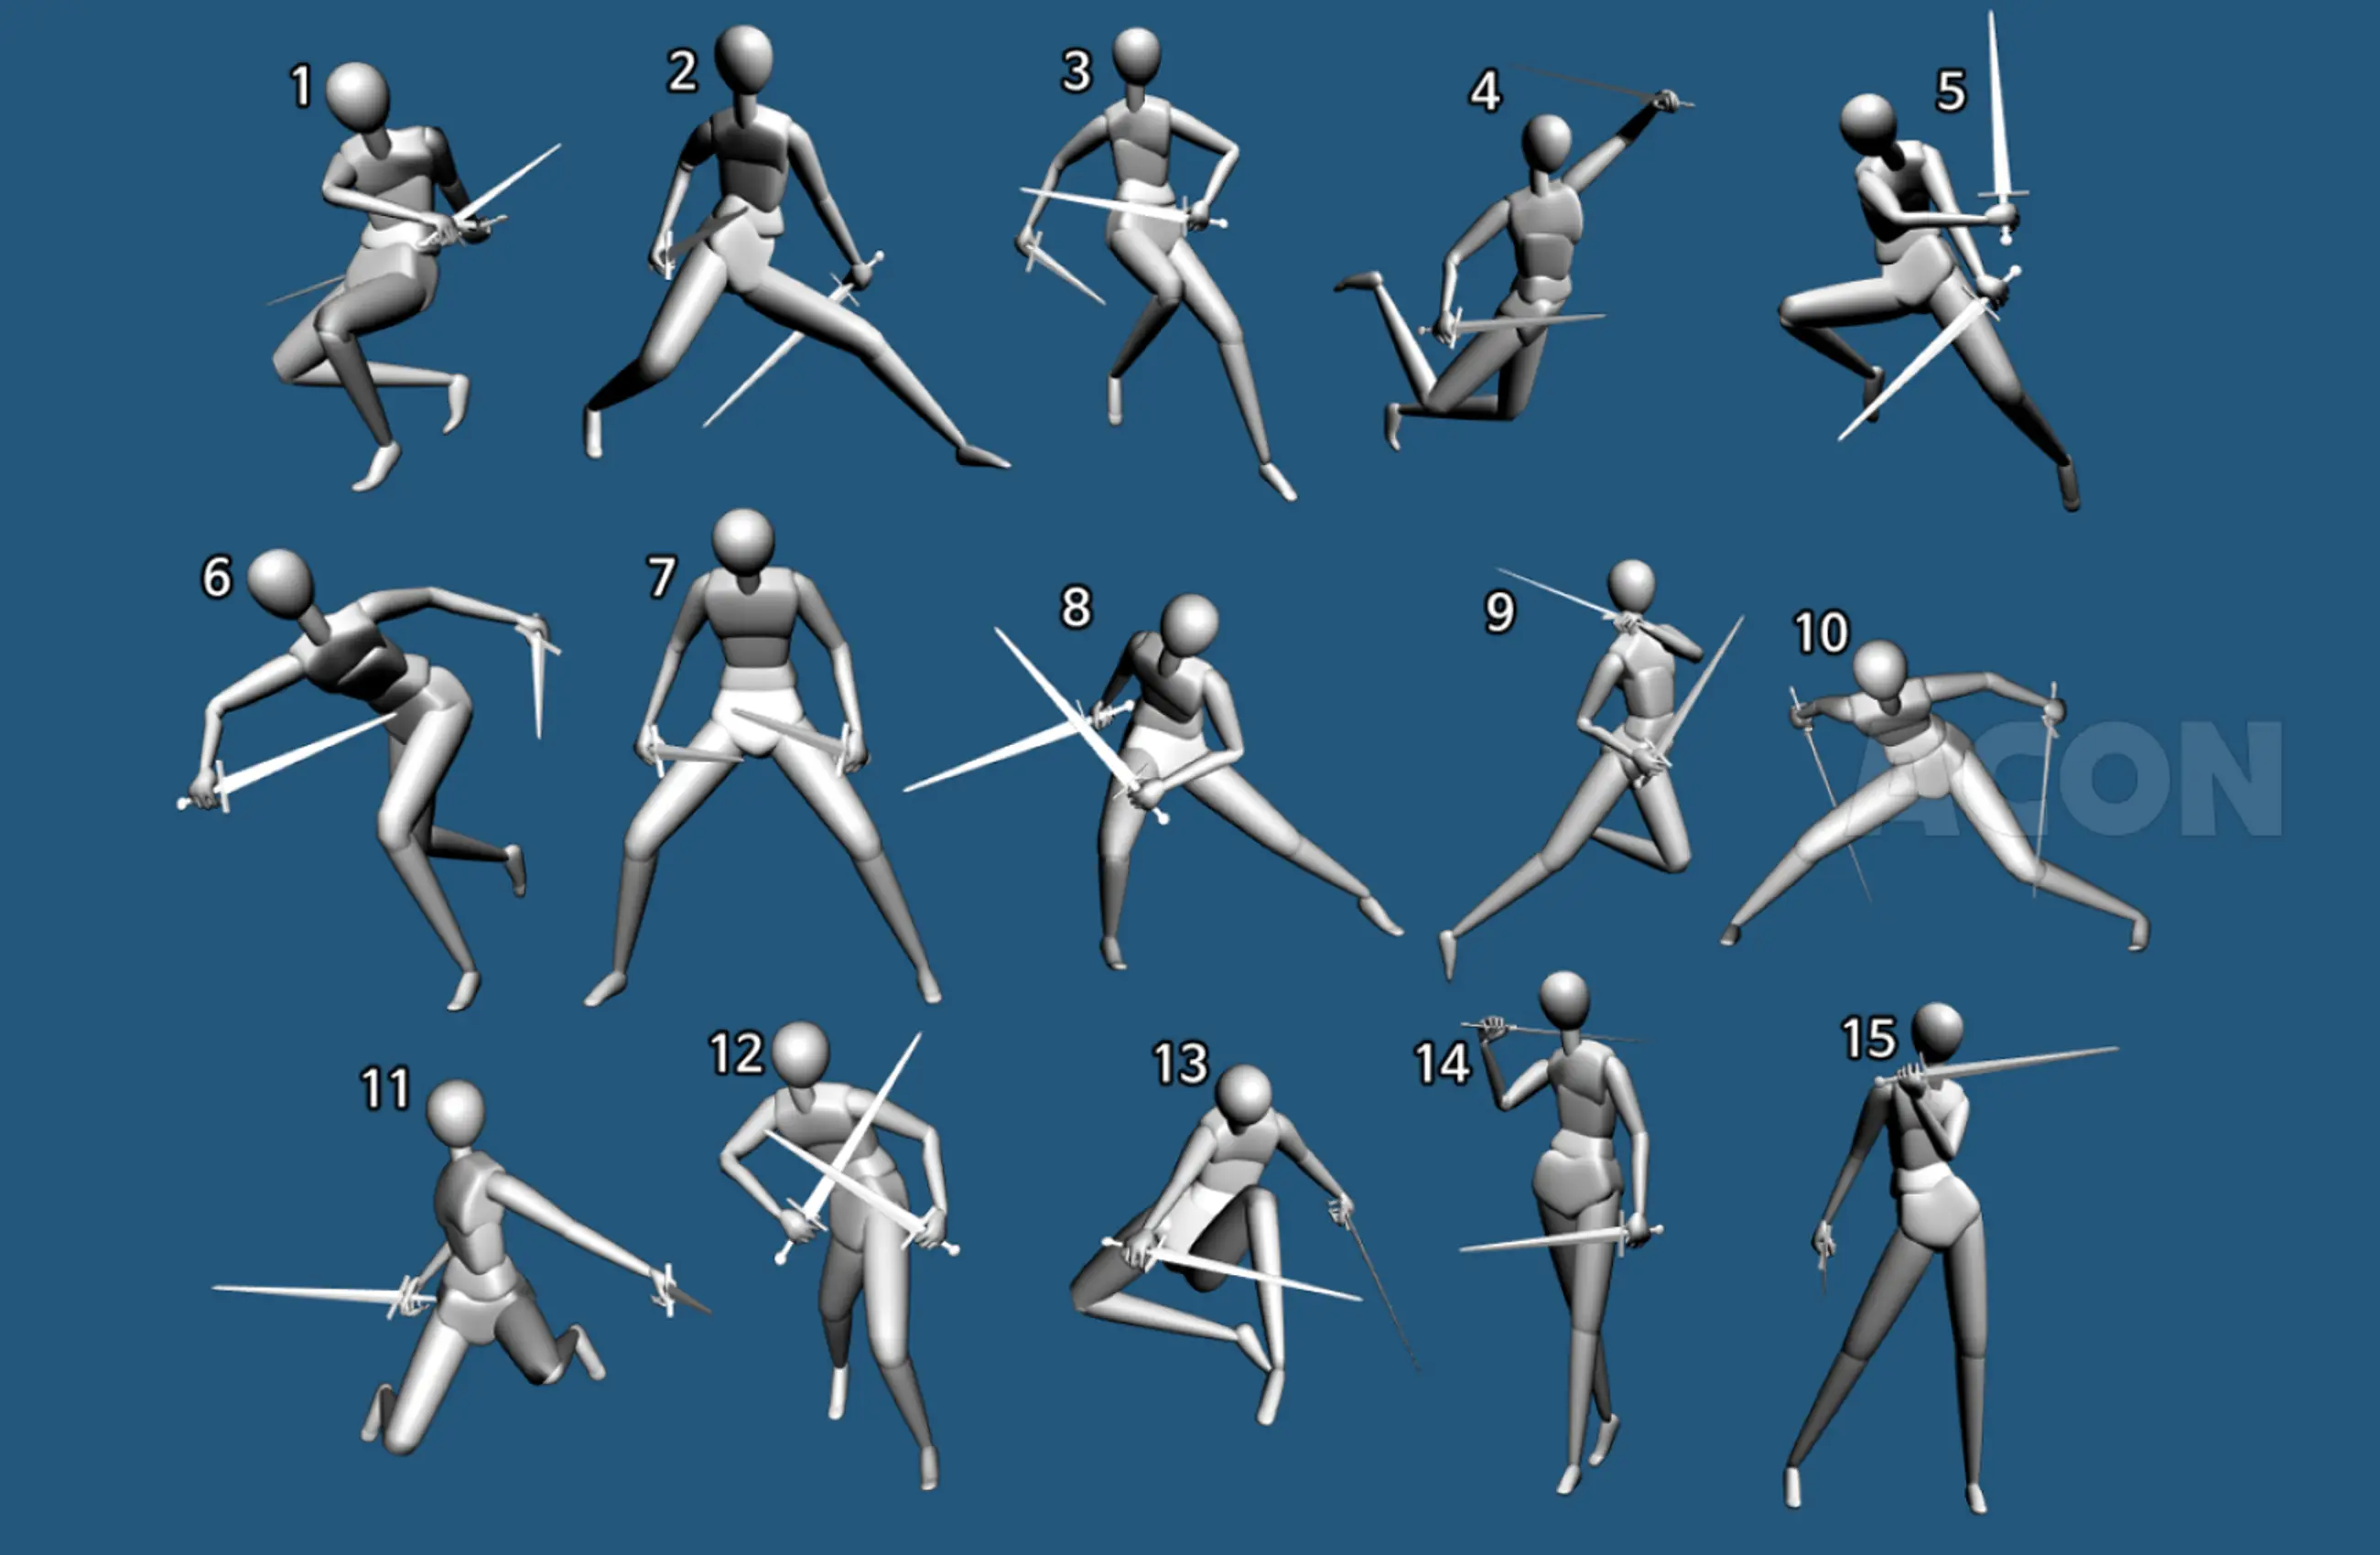 sword fighting poses reference